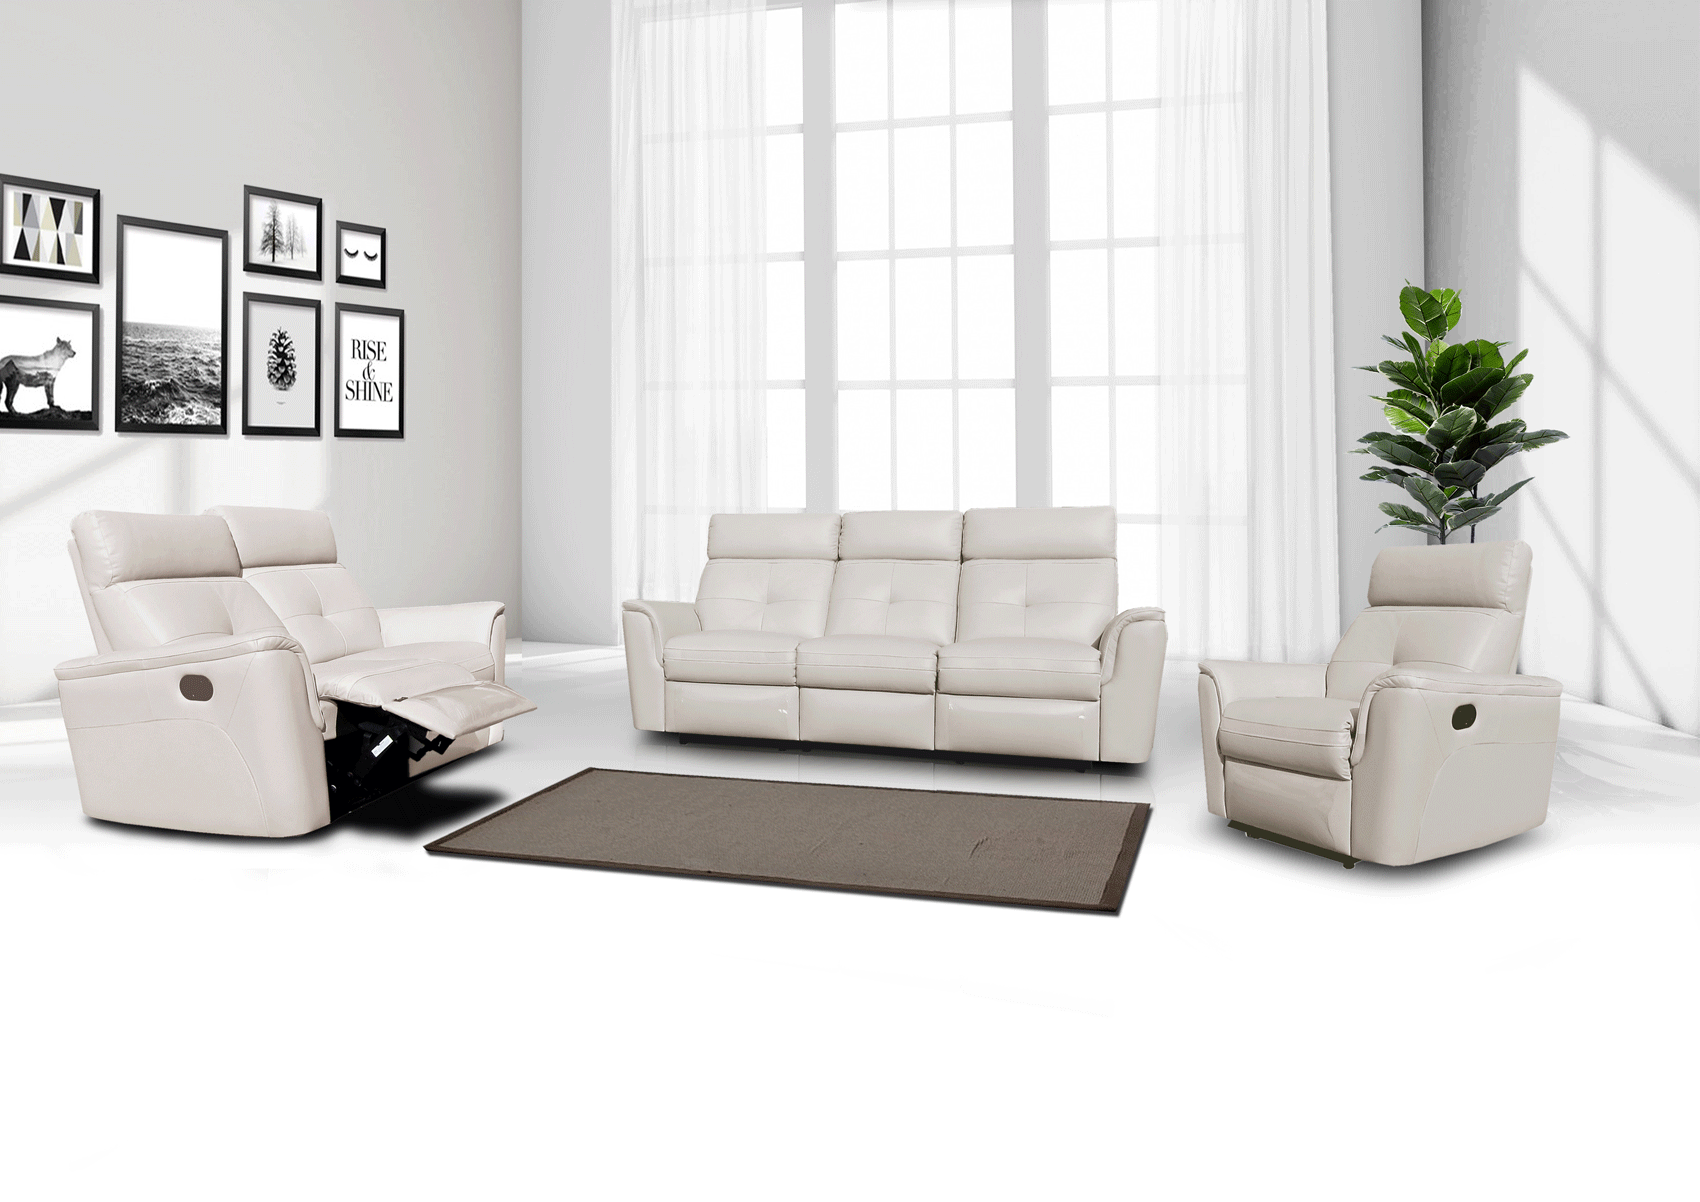 Brands ALF Capri Coffee Tables, Italy 8501 White w/Manual Recliners